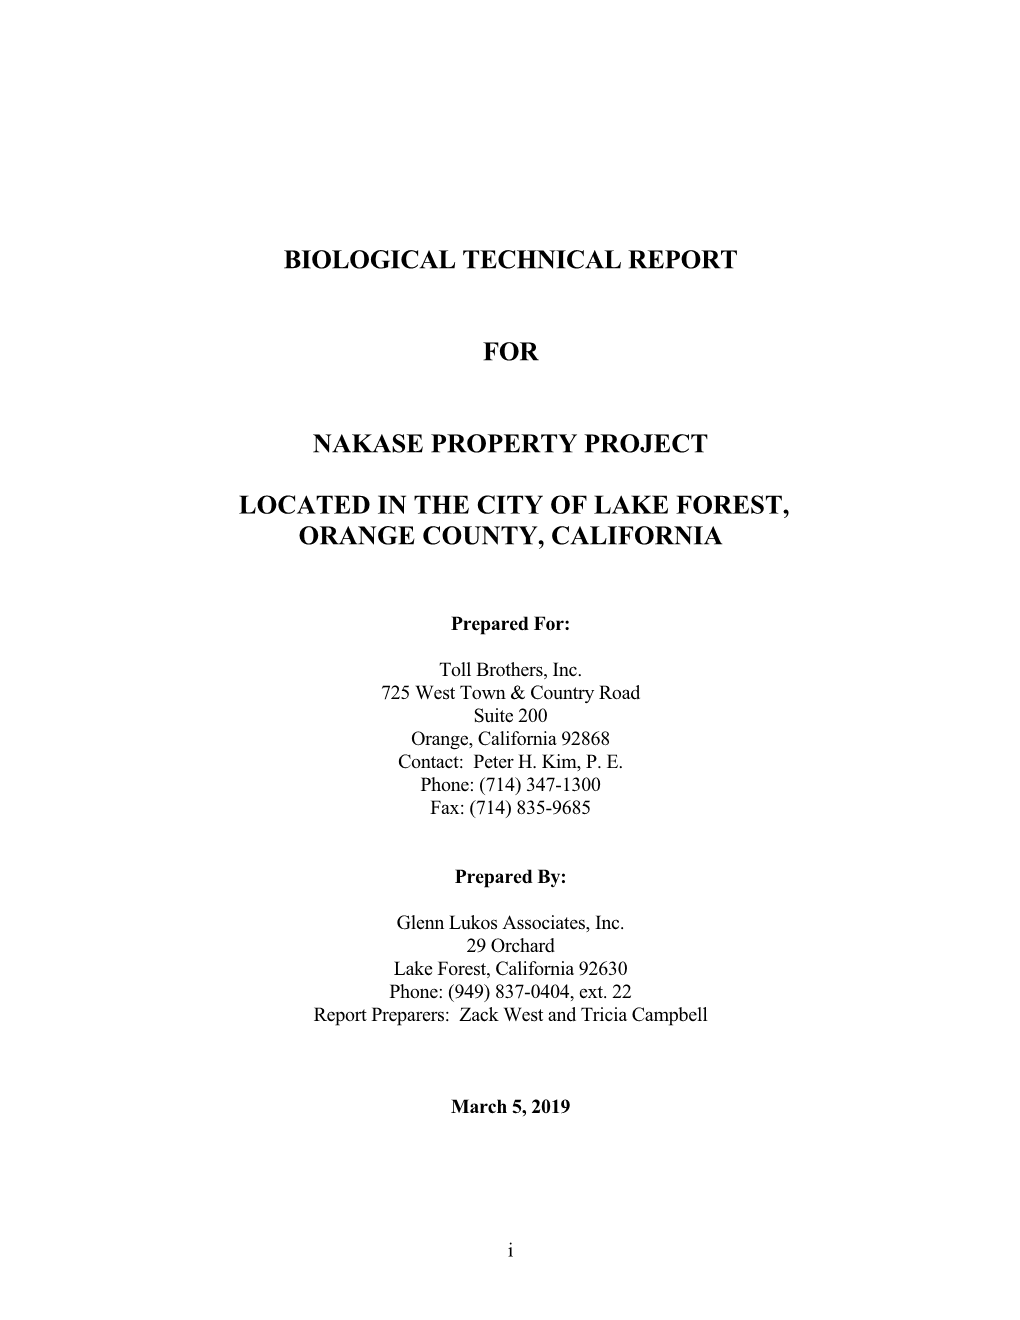 Biological Technical Report For